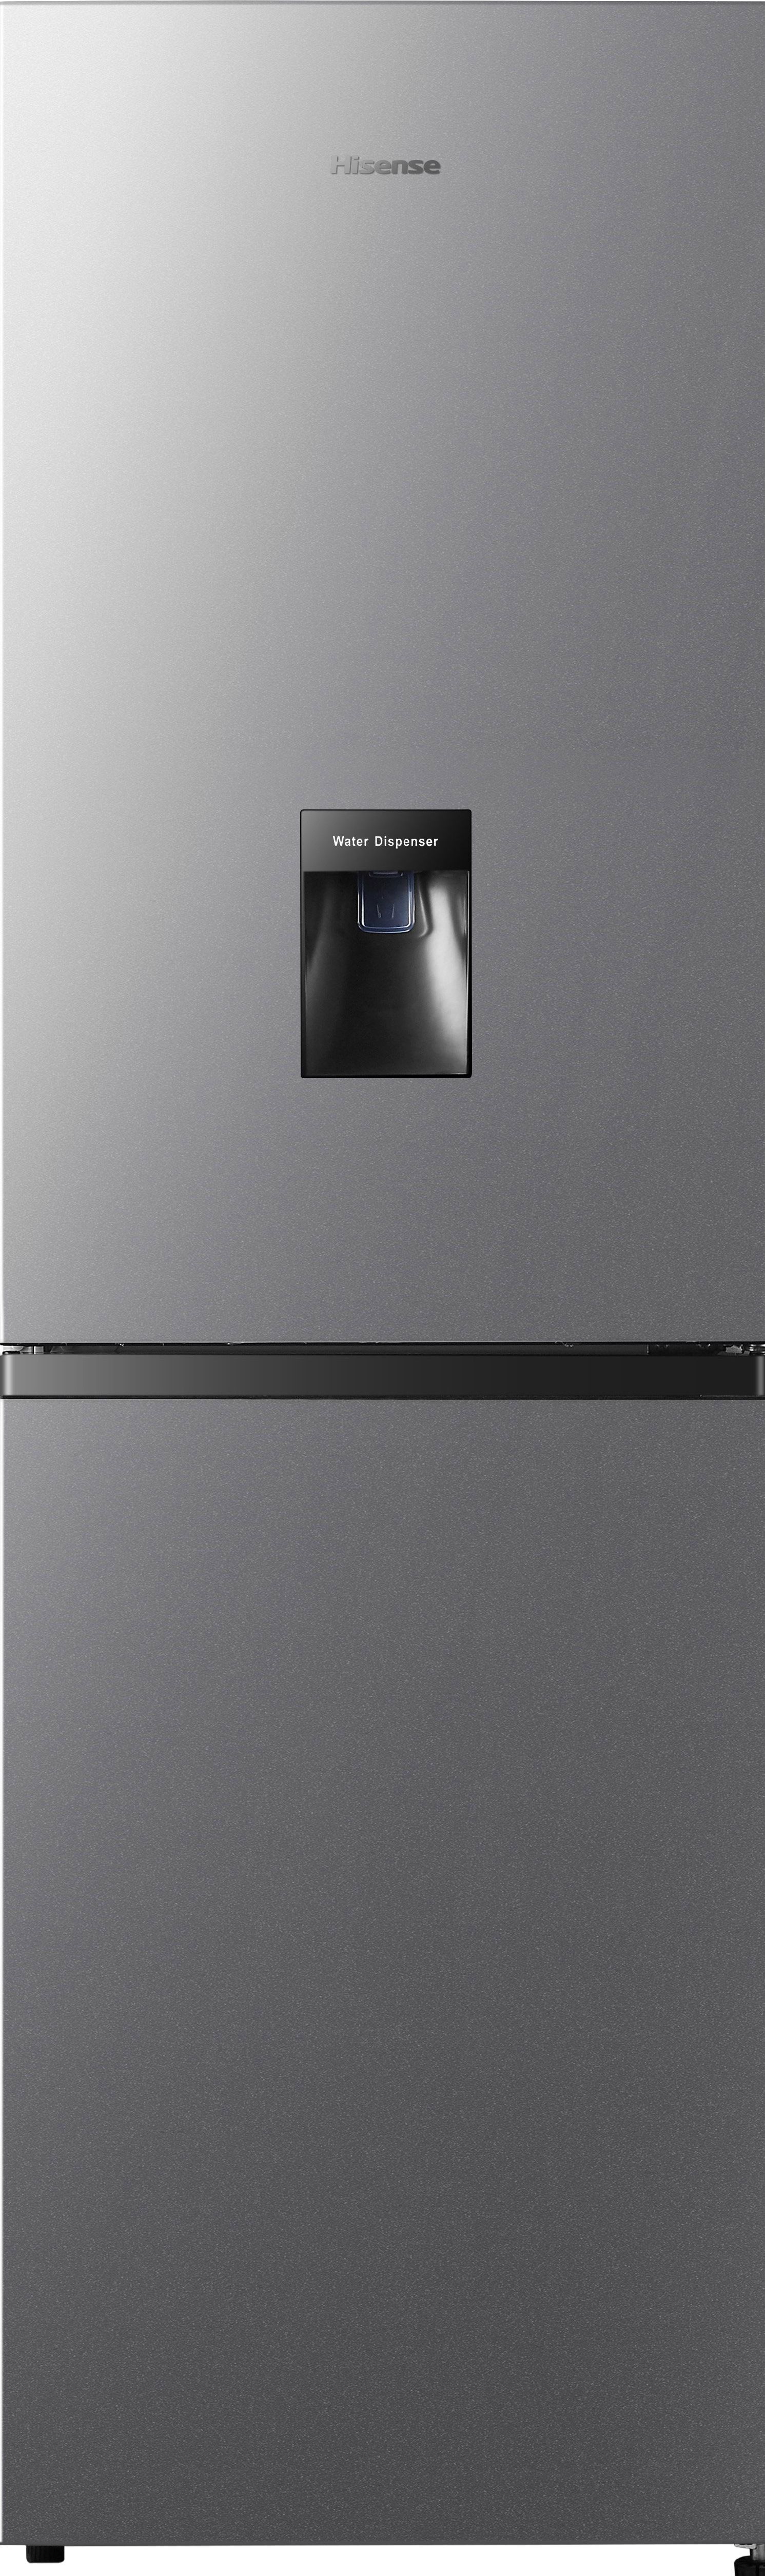 Hisense RB327N4WCE 50/50 No Frost Fridge Freezer - Stainless Steel - E Rated, Stainless Steel